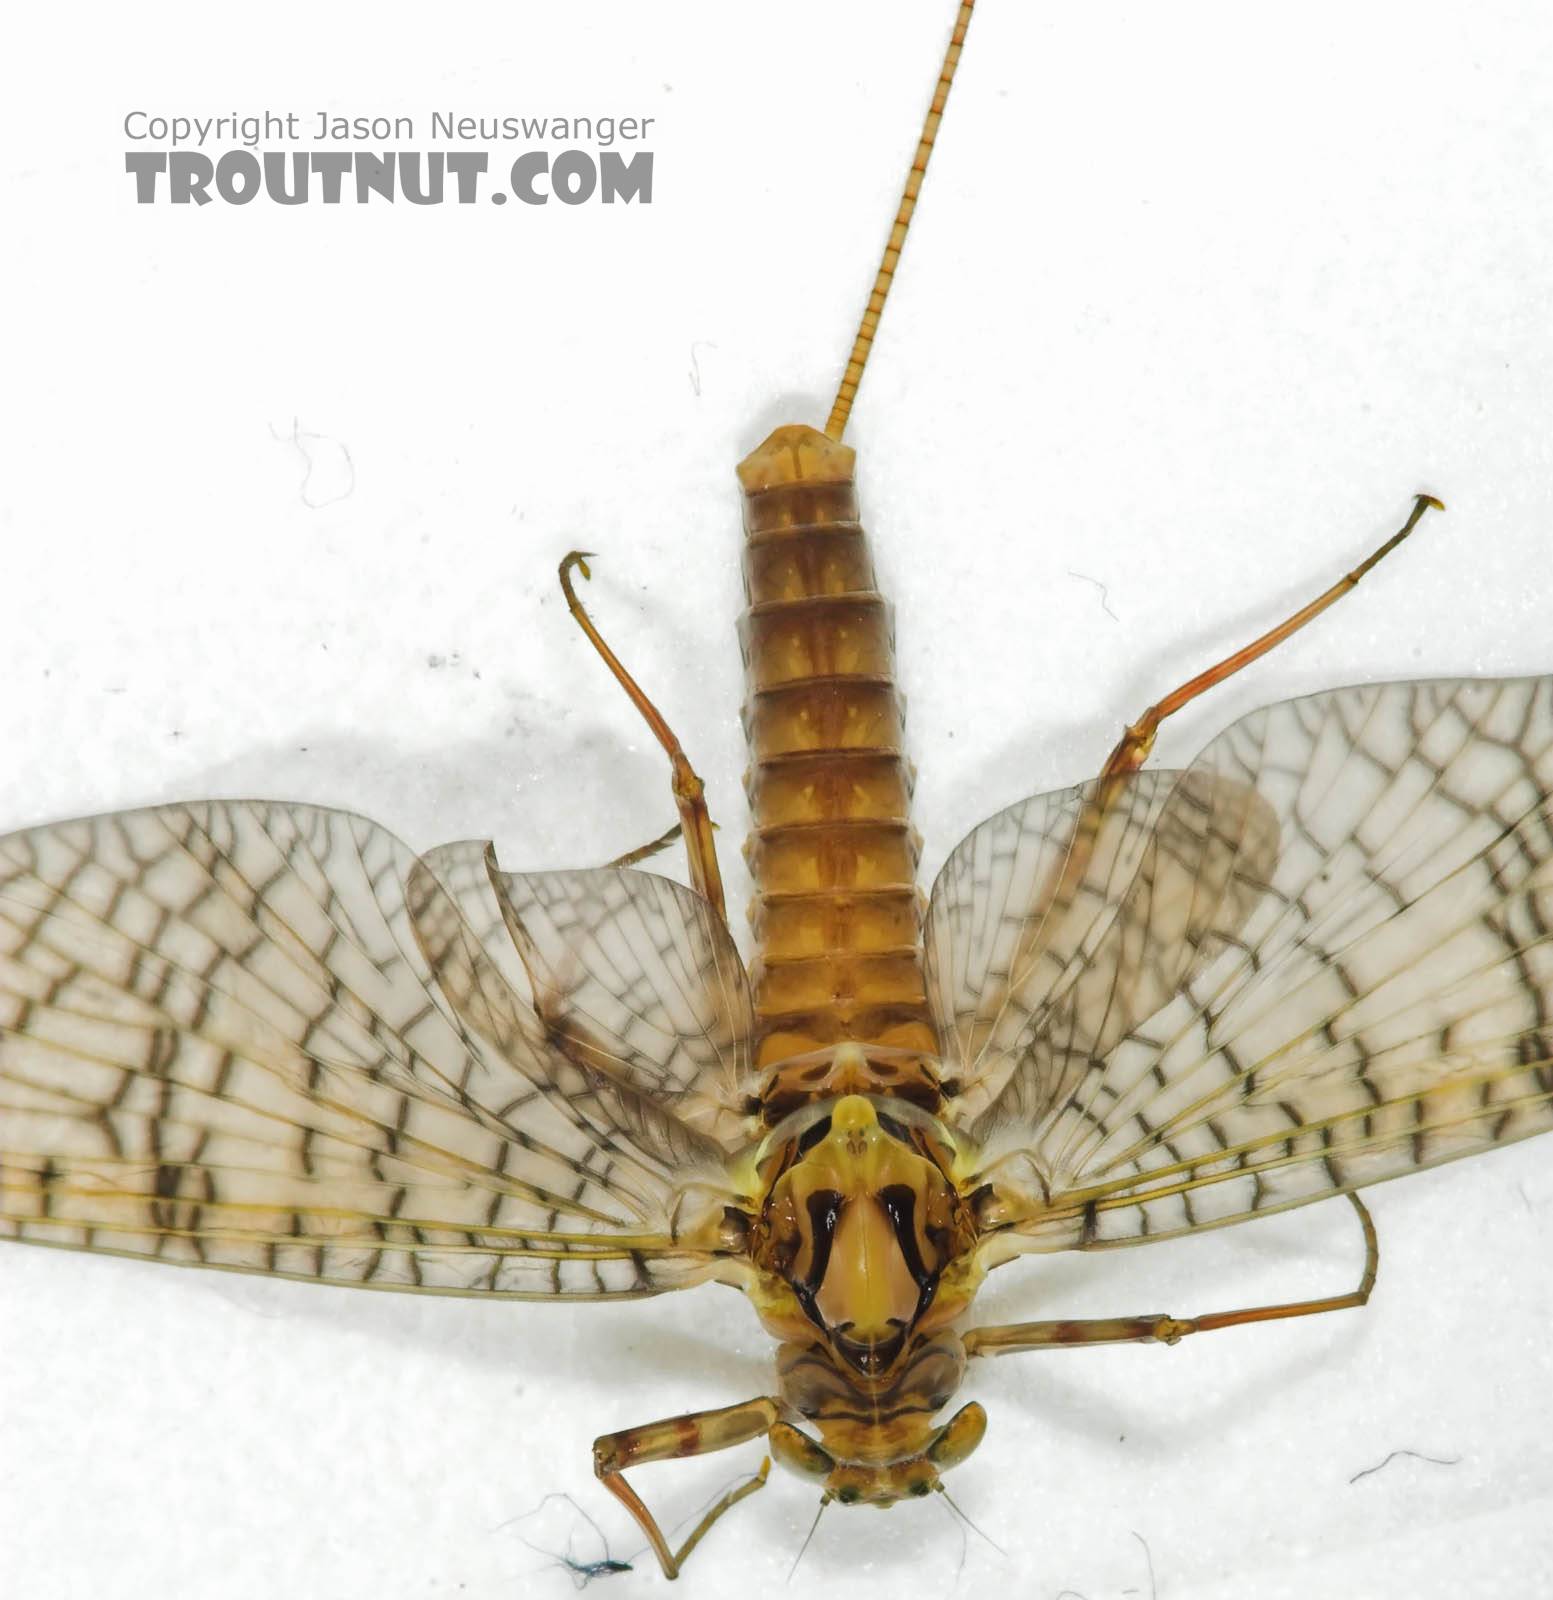 Female Maccaffertium (March Browns and Cahills) Mayfly Adult from the Namekagon River in Wisconsin